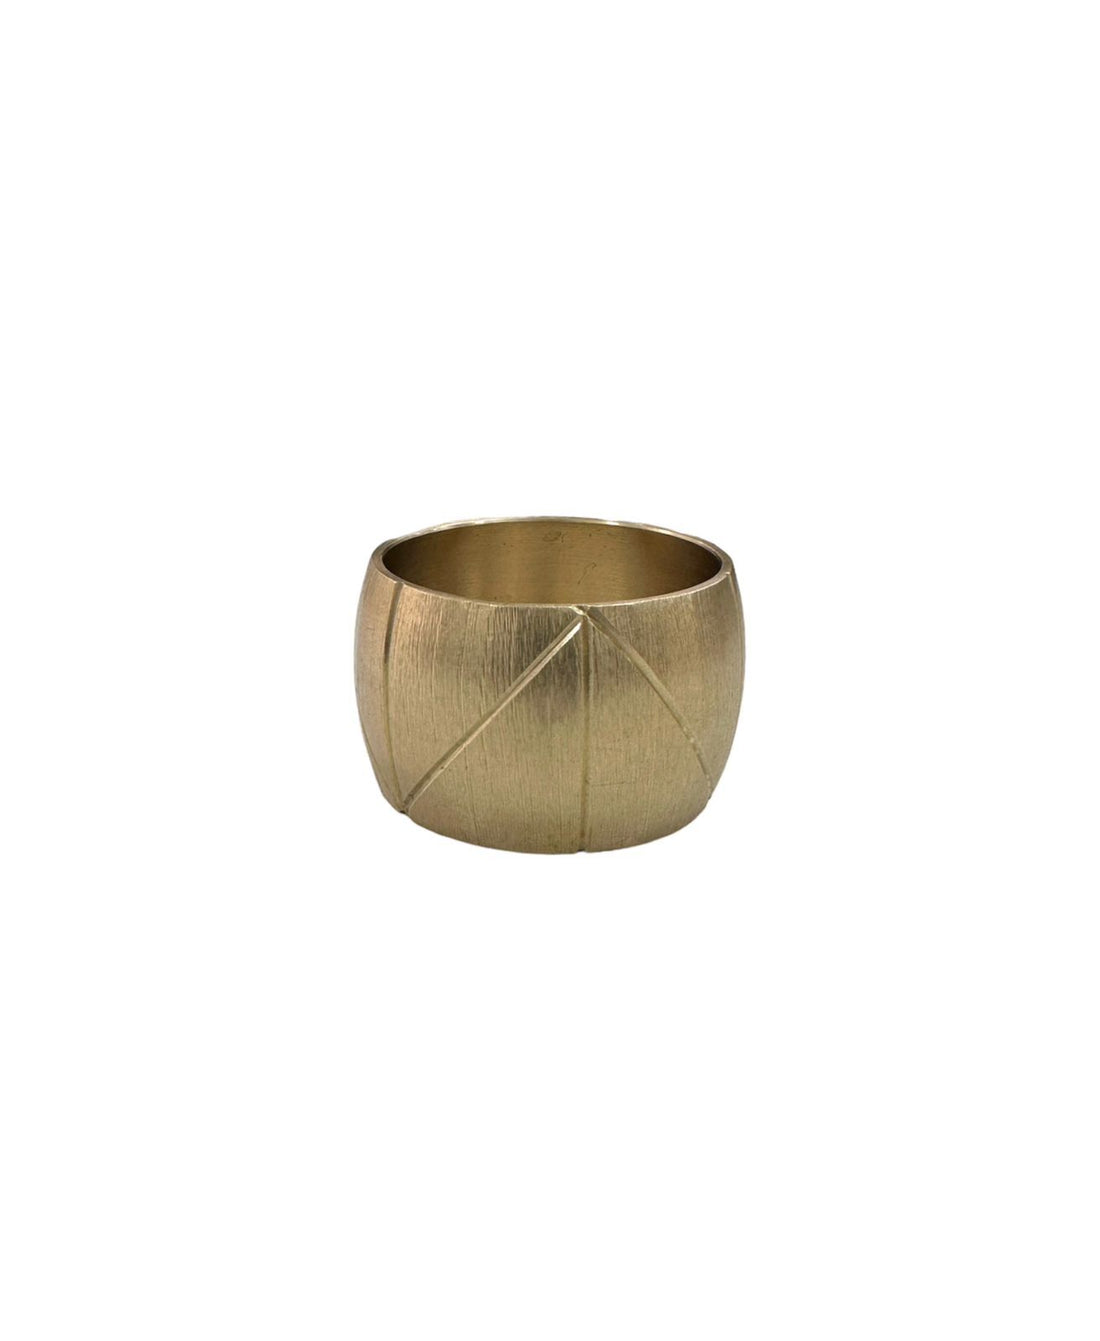 NAPKIN RING- BRASS TEXTURED DOME